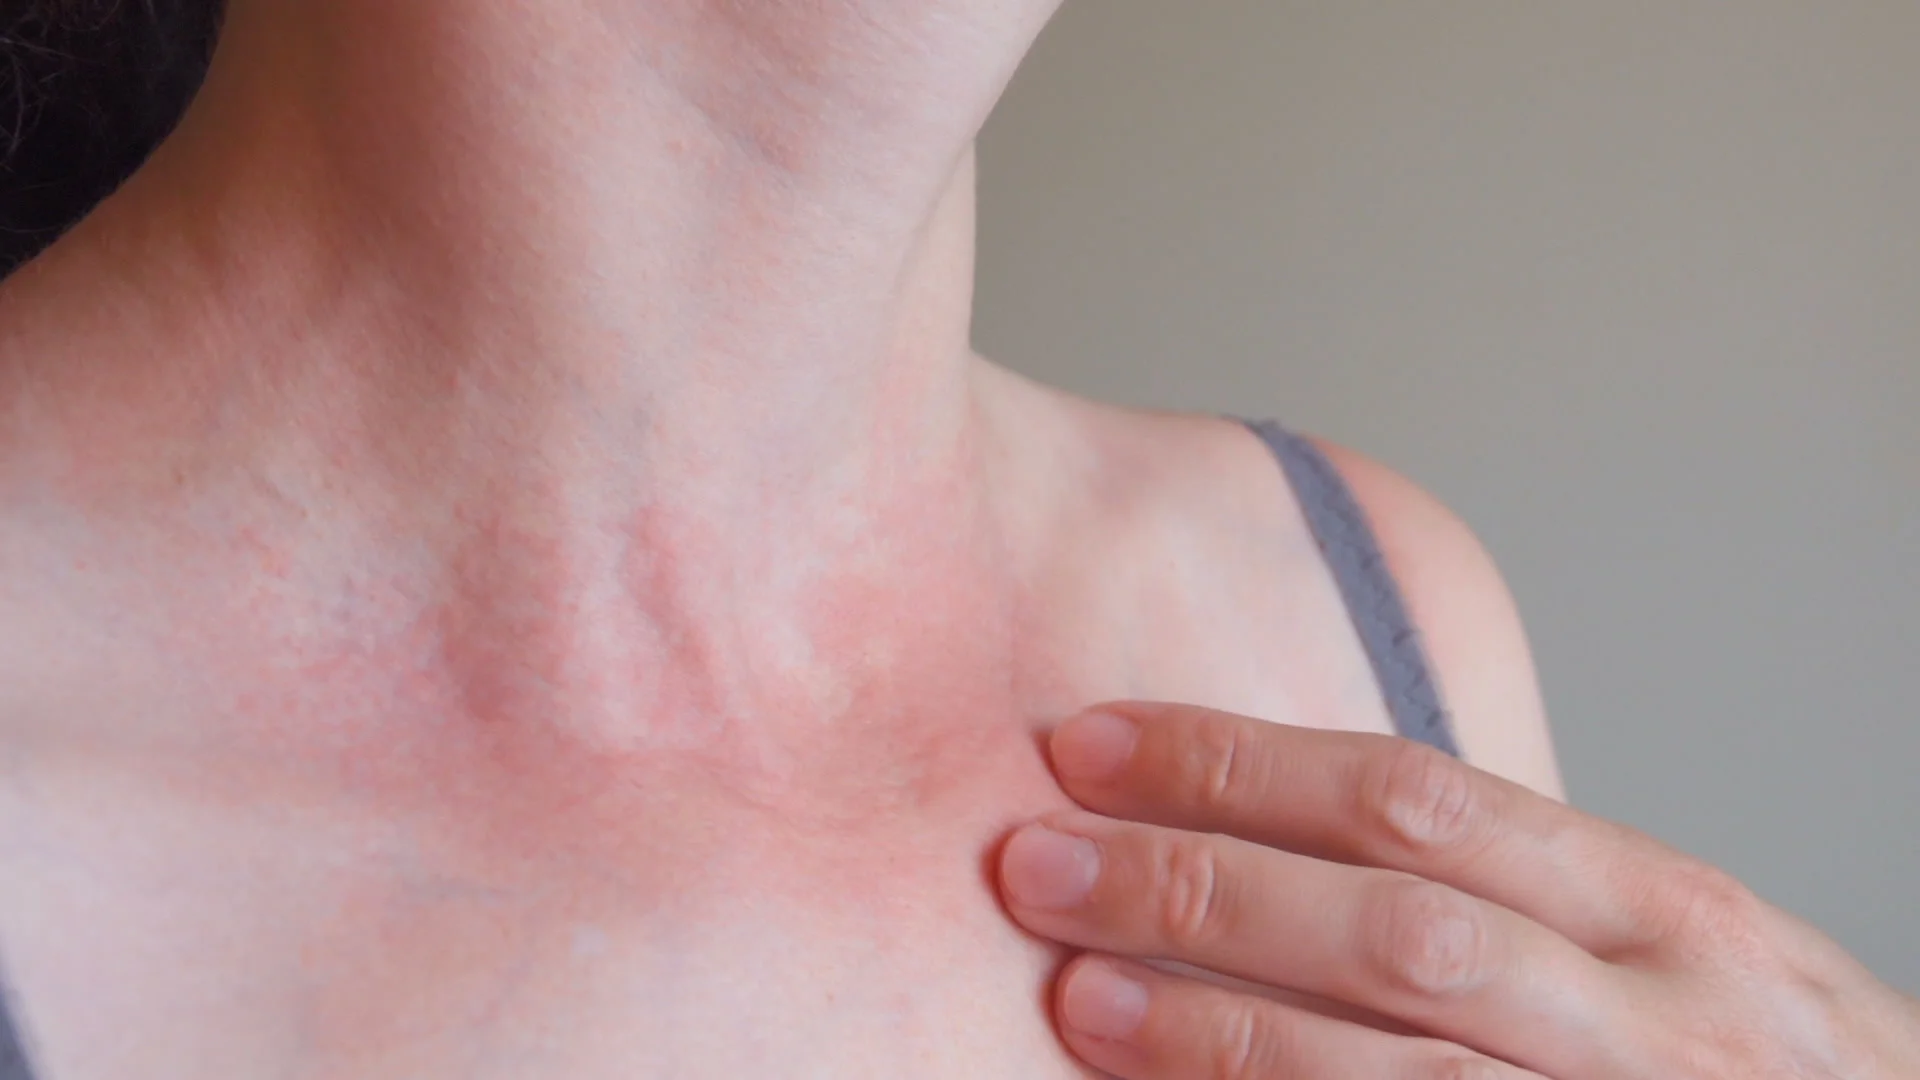 Itchy Neck: Symptoms, Causes, Treatments, and More